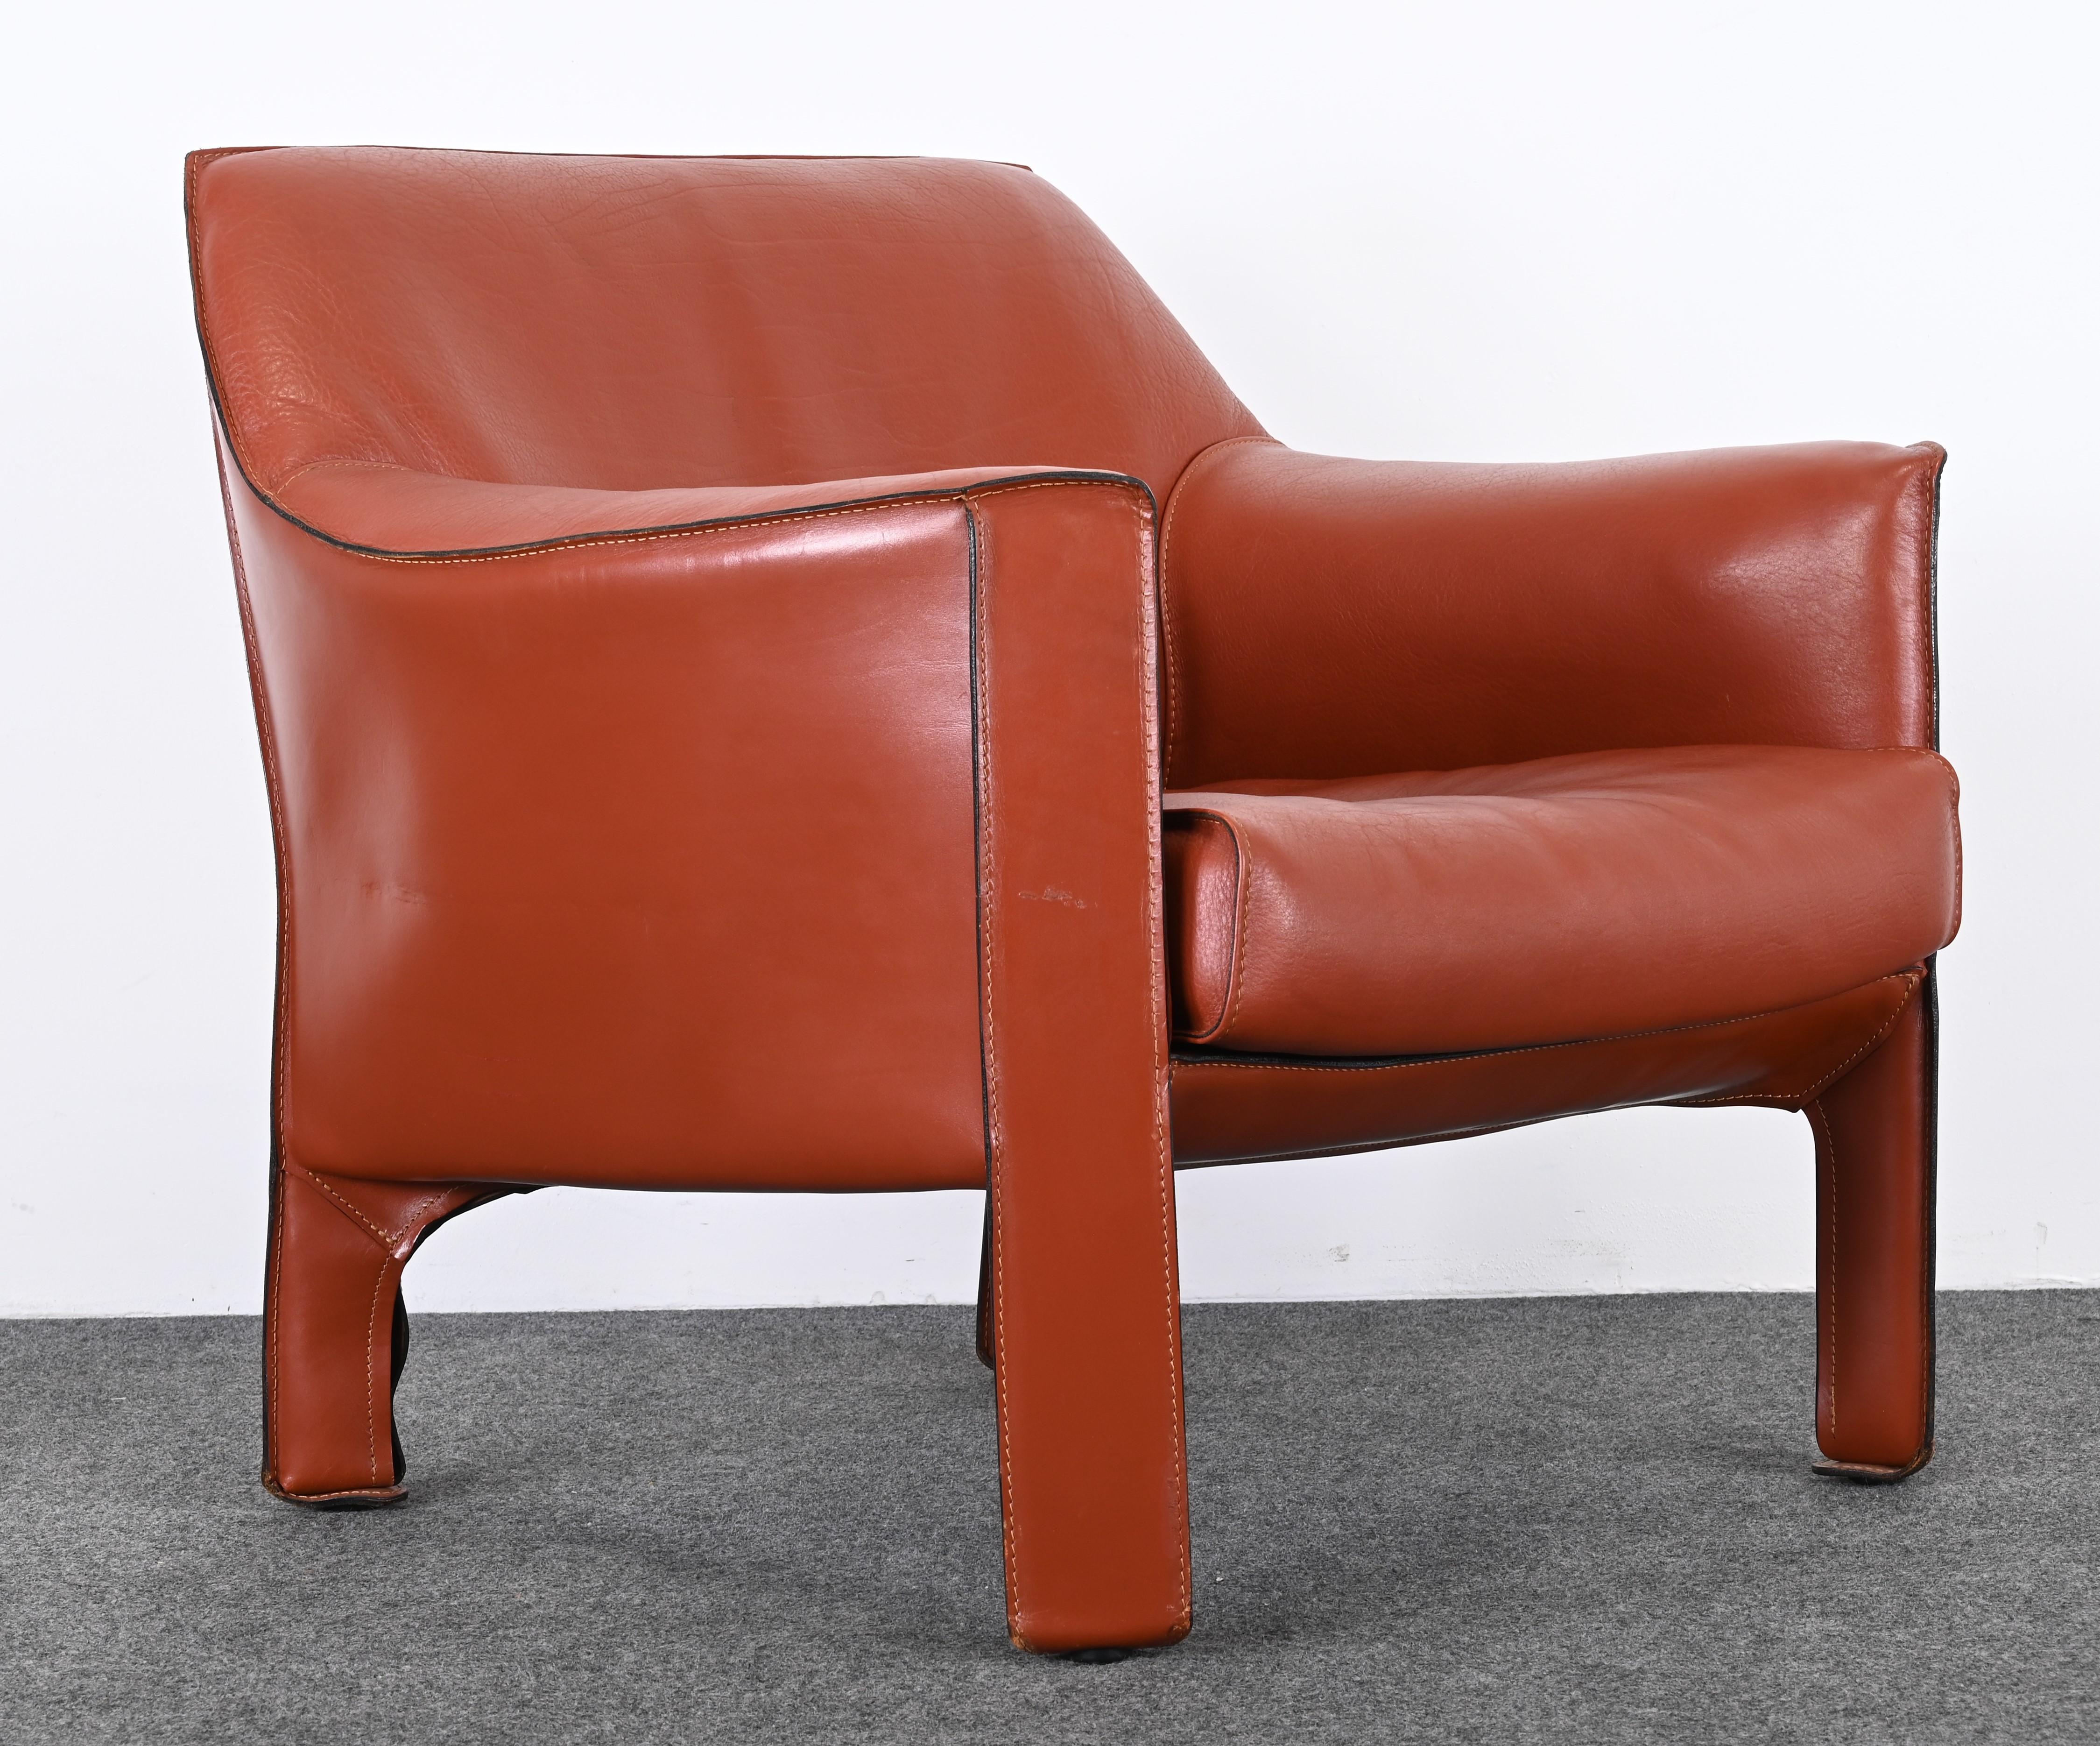 A beautiful 415 leather cab chair designed by architect and designer Mario Bellini for Cassina. This chair is no longer in production and is highly sought after. As seen in the MoMa and other design magazines it is a design classic. Would look great